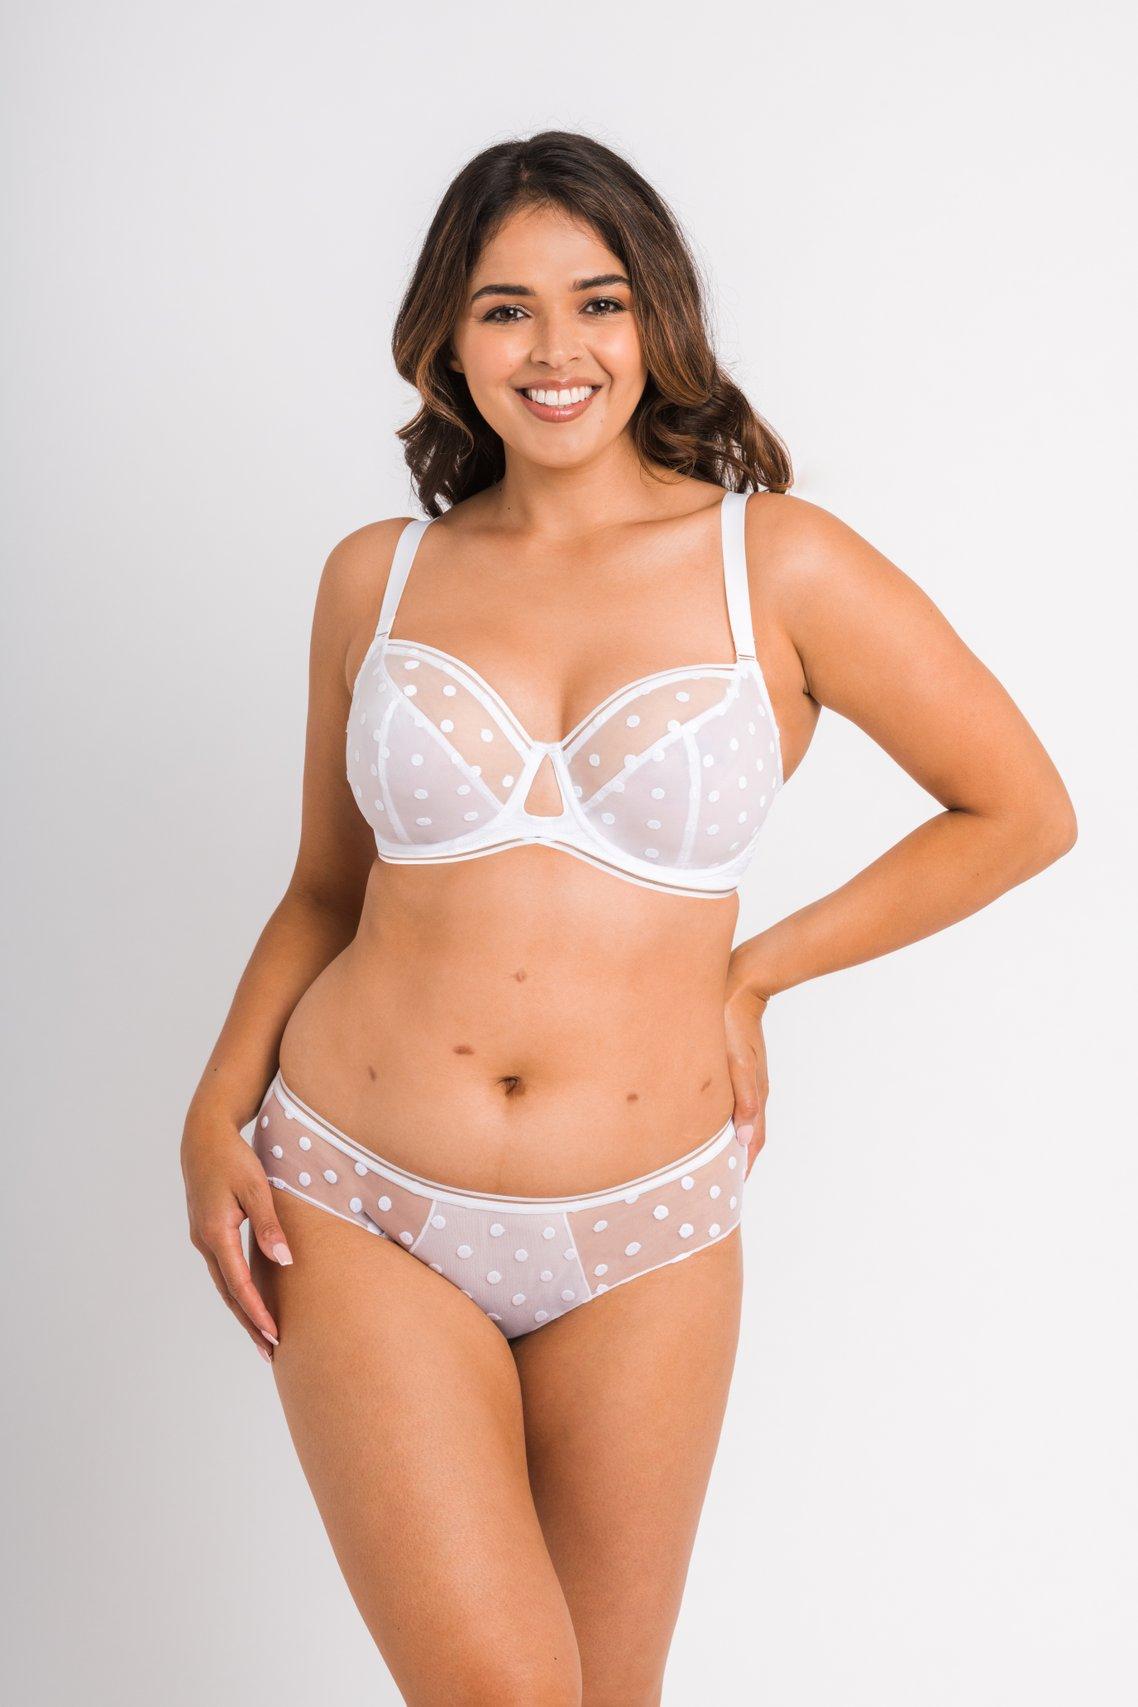 rolle forvirring godt Plus Size Bridal Lingerie: 28 Stunning Sets & How to Choose Them -  hitched.co.uk